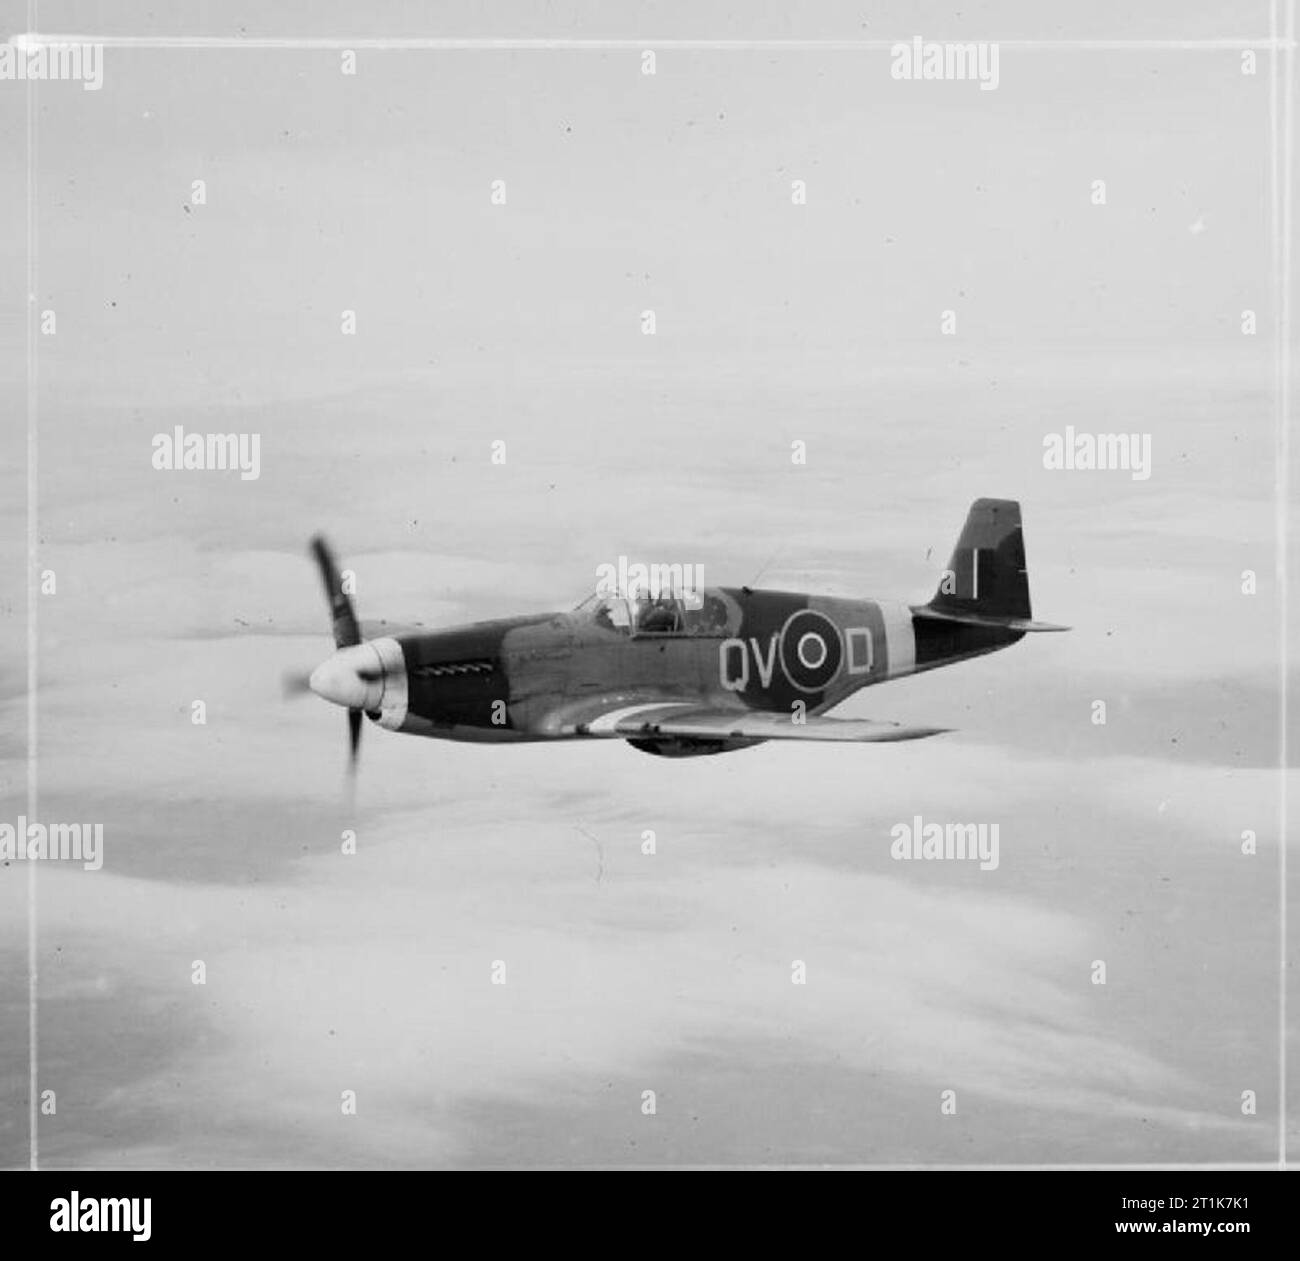 Royal Air Force 1939-1945- Fighter Command Mustang III of No 19 Squadron, based at Ford, in flight, 21 April 1944. It wears the standard Mustang recognition markings of white spinner, nose and wing bands. Production of the Allison-engined Mustang I and II was halted in mid-1943 to make way for the Merlin-powered Mk III. The new Mustang was designed for the air-superiority role, and finally gave both the USAAF and RAF a single-seat fighter that combined excellent high-altitude performance with an outstanding range (combat radius was 750 miles with drop-tanks). Stock Photo